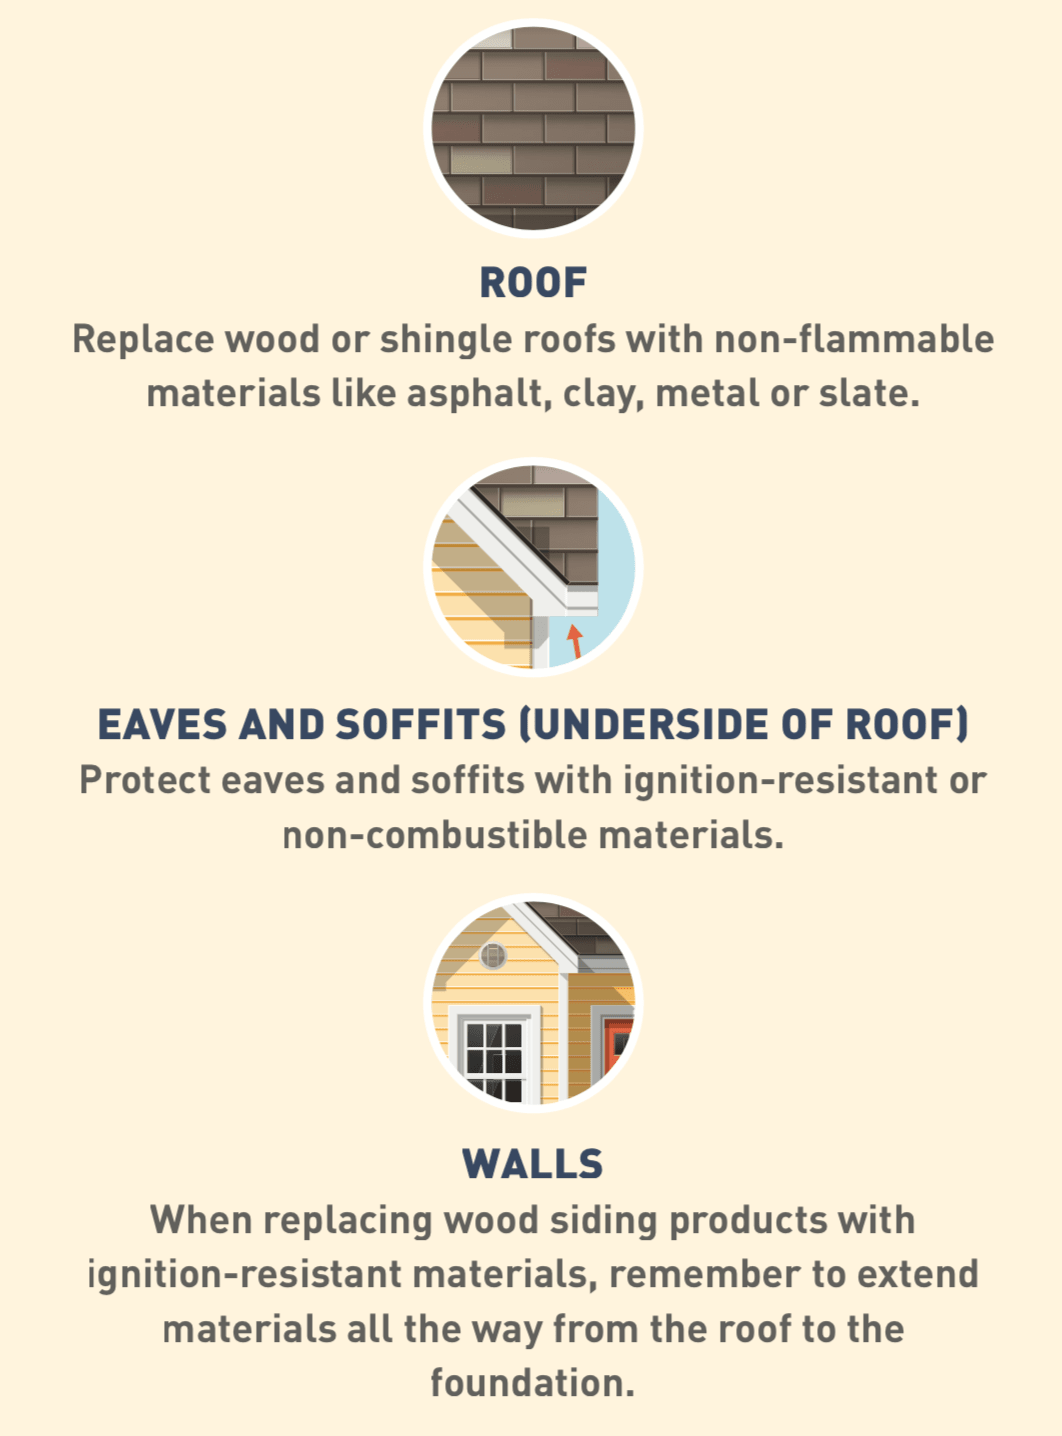 Roof—Replace wood or shingle roofs with non-flammable materials like asphalt, clay, metal or slate     Eaves and soffits (underside of roof)—protect eaves and soffits with ignition-resistant or non-combustible materials     Walls—when replacing wood siding product with ignition-resistant materials, remember to extend materials all the way from the roof to the foundation.